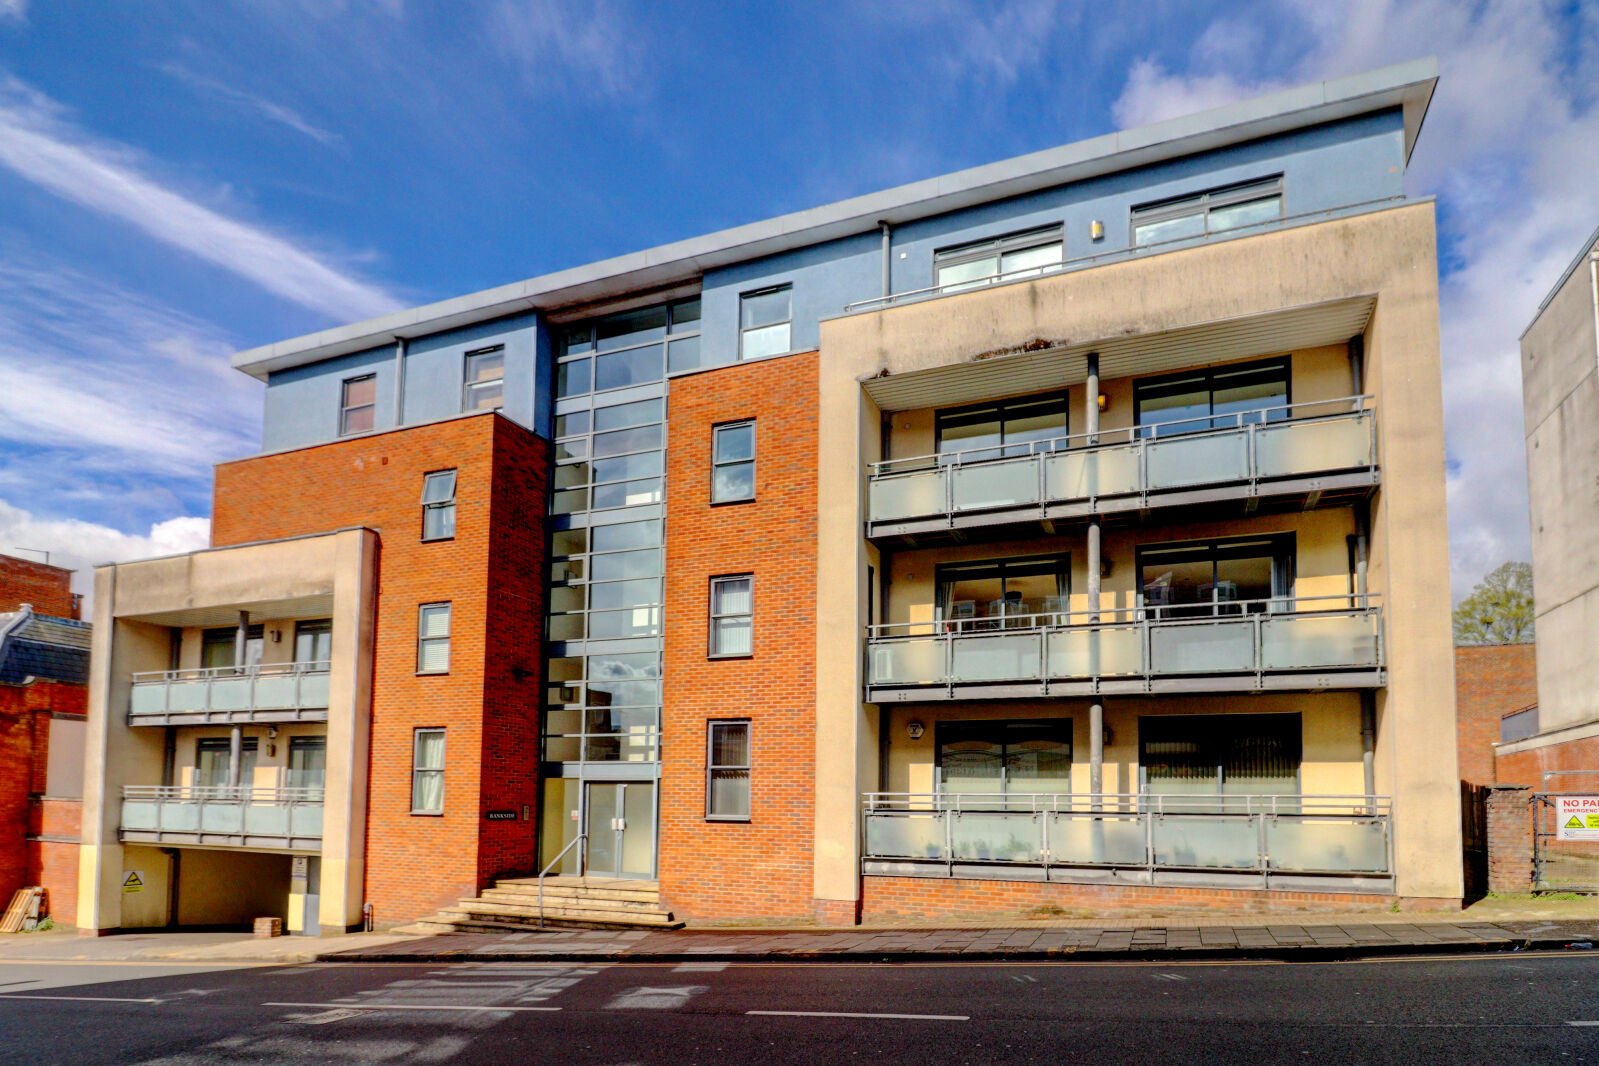 2 bedroom  flat for sale Corporation Street, High Wycombe, HP13, main image